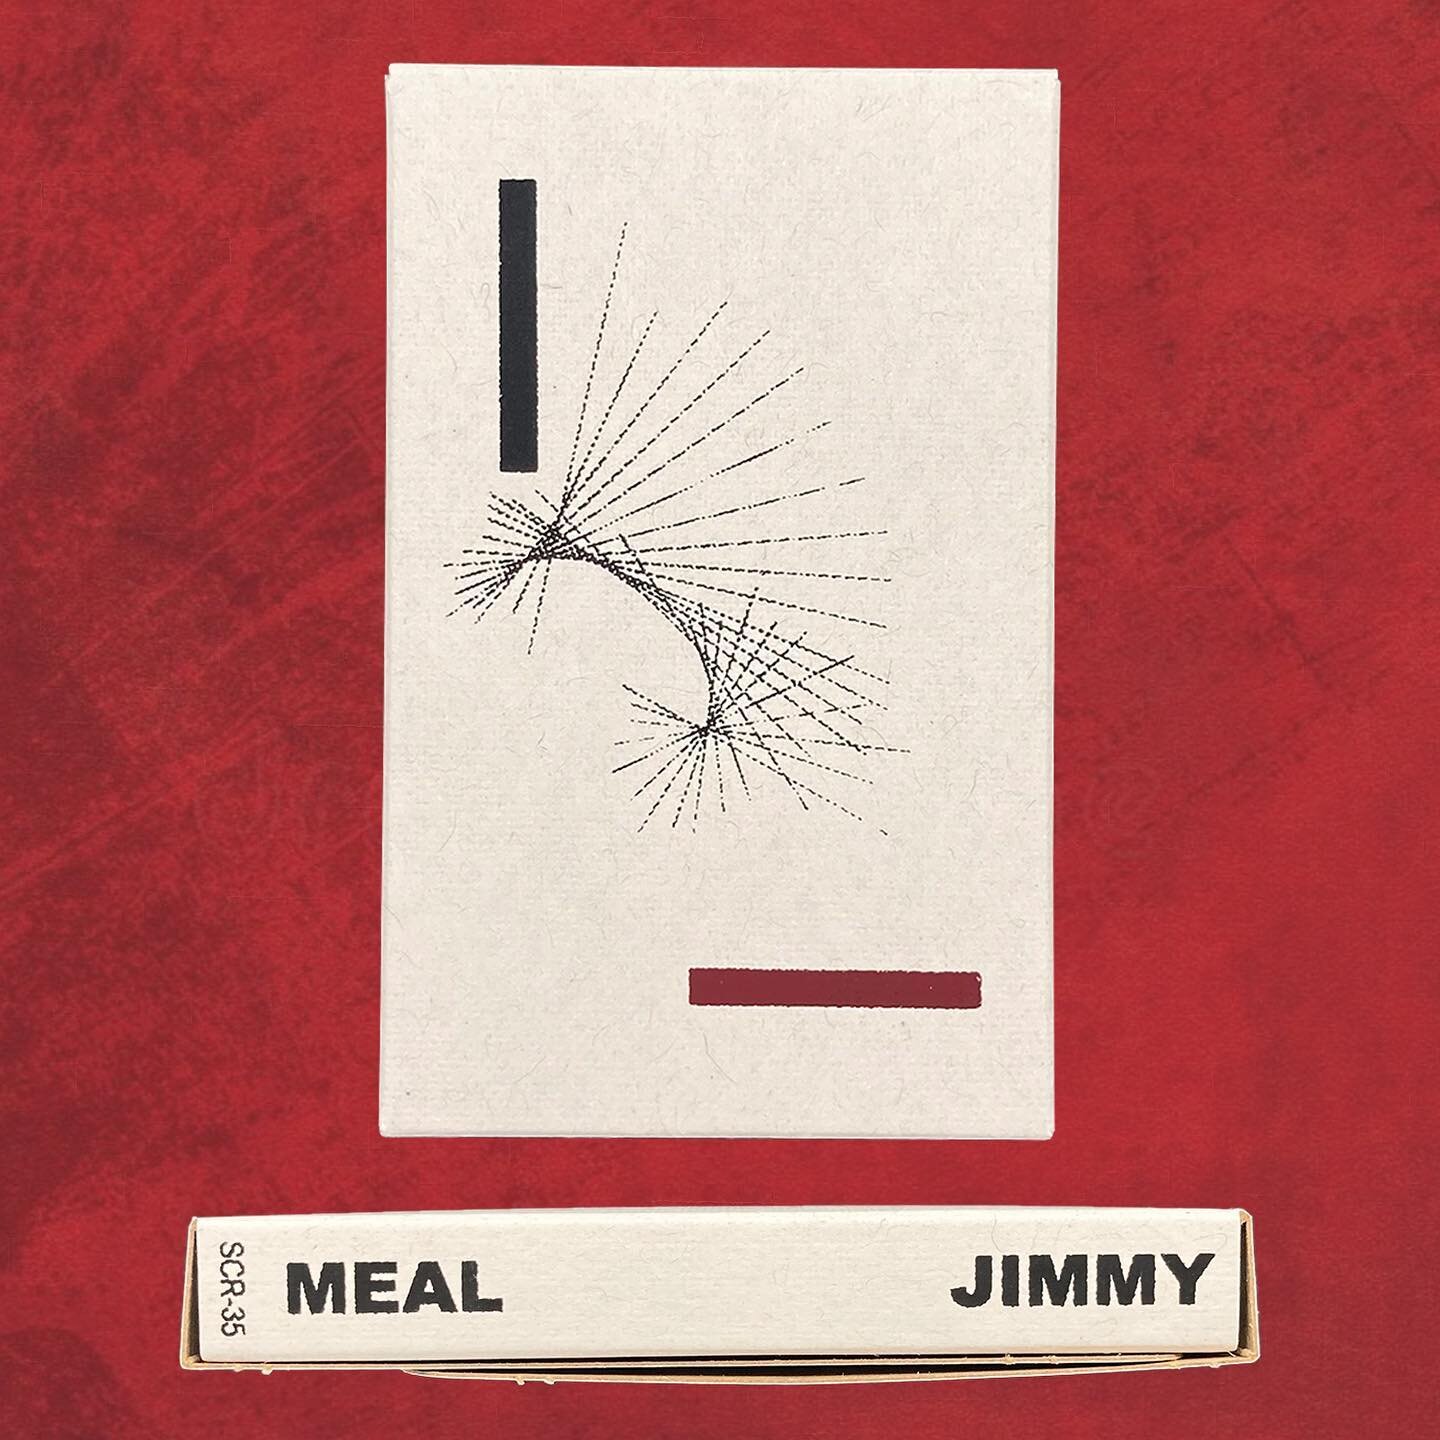 🛑 Warning: this tape rocks! 🛑 Meal bring high-octane riffs all of the way from Finland with their debut EP, Jimmy! Out Now! 🤠
.
Link in bio, of course.
.
@r_e_a_l_m_e_a_l